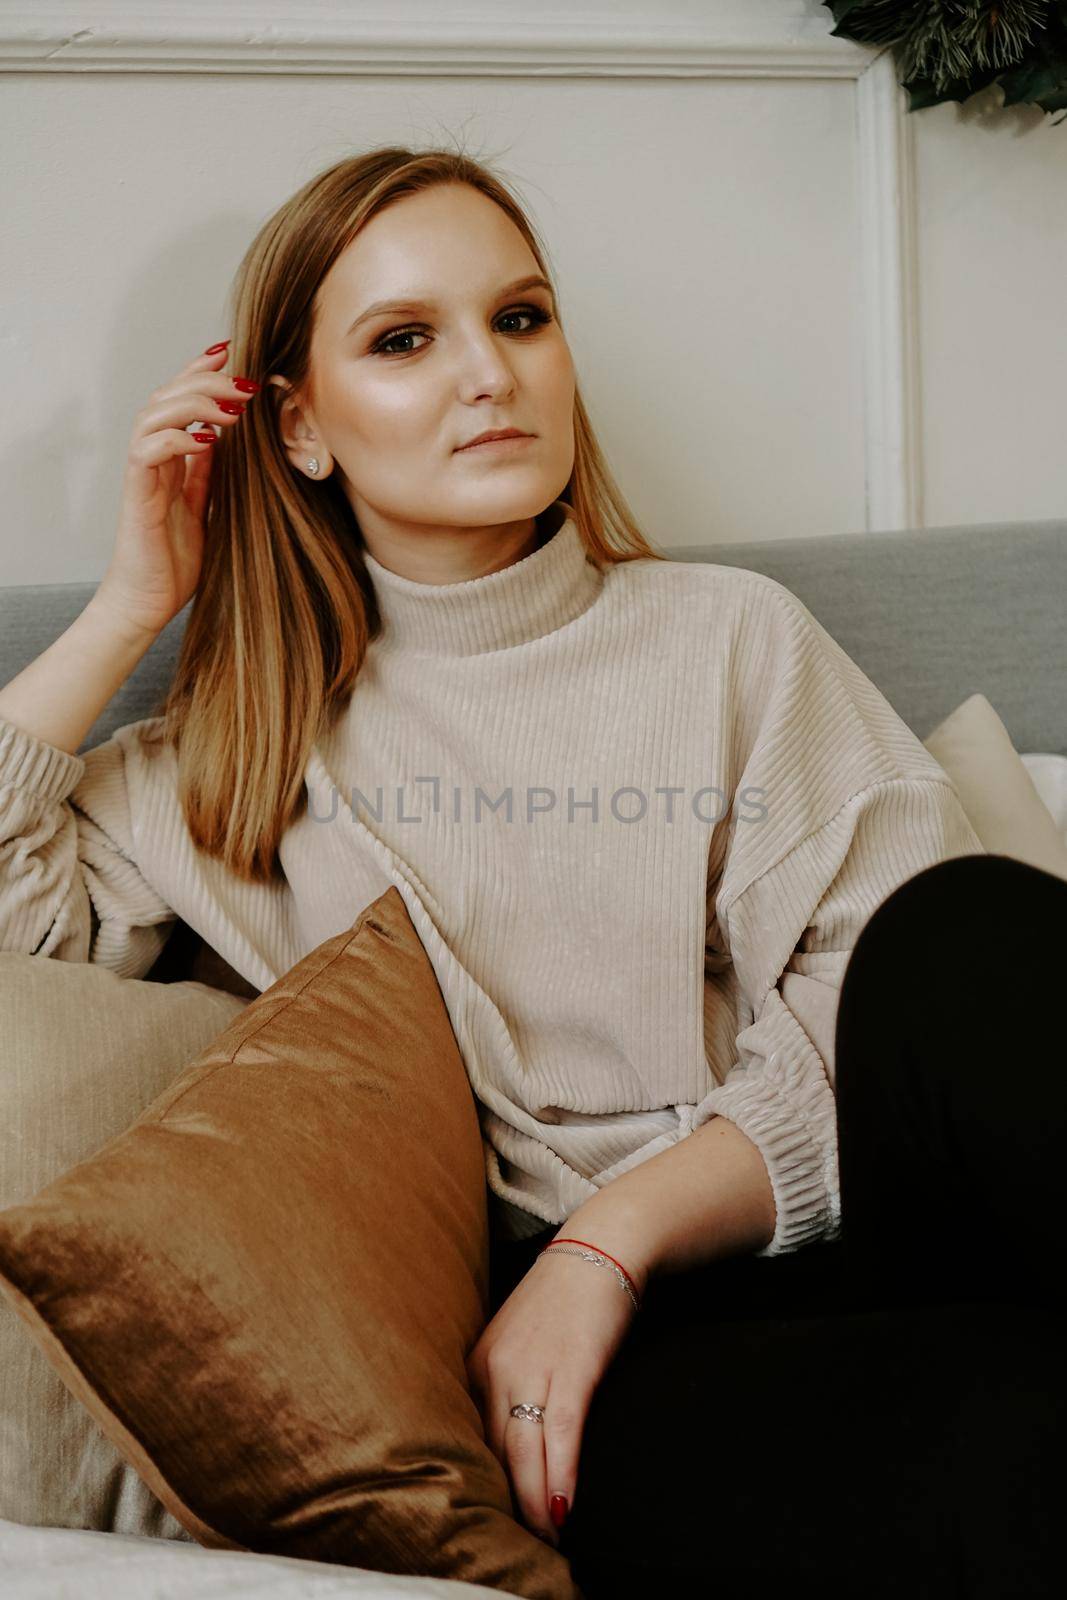 Woman with bright makeup and strict facial features dressed in beige sweater sitting on bed